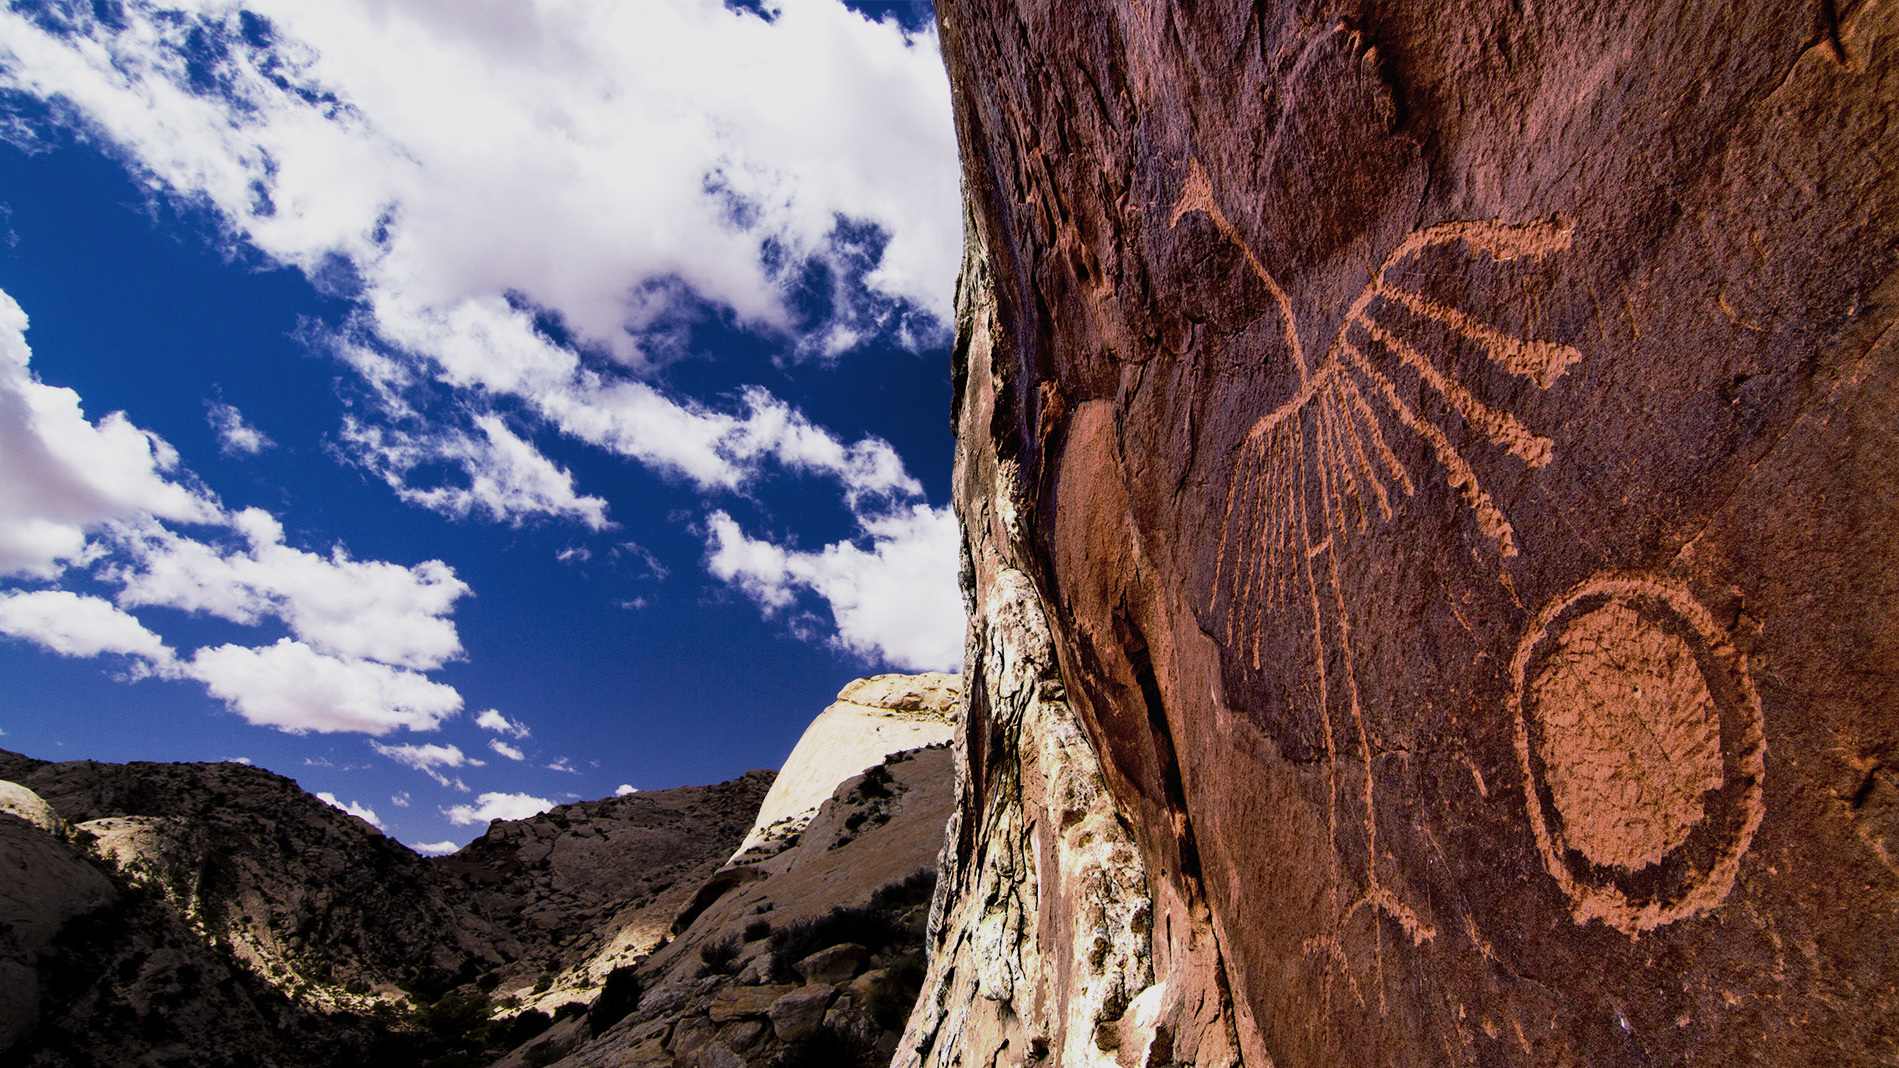 A petroglyph of a crane on Comb Ridge, part of the Bears Ears National Monument. The Ancestral Puebloans lived in the area's alcoves and grew corn in its washes, according to the Bears Ears Inter-Tribal Coalition.